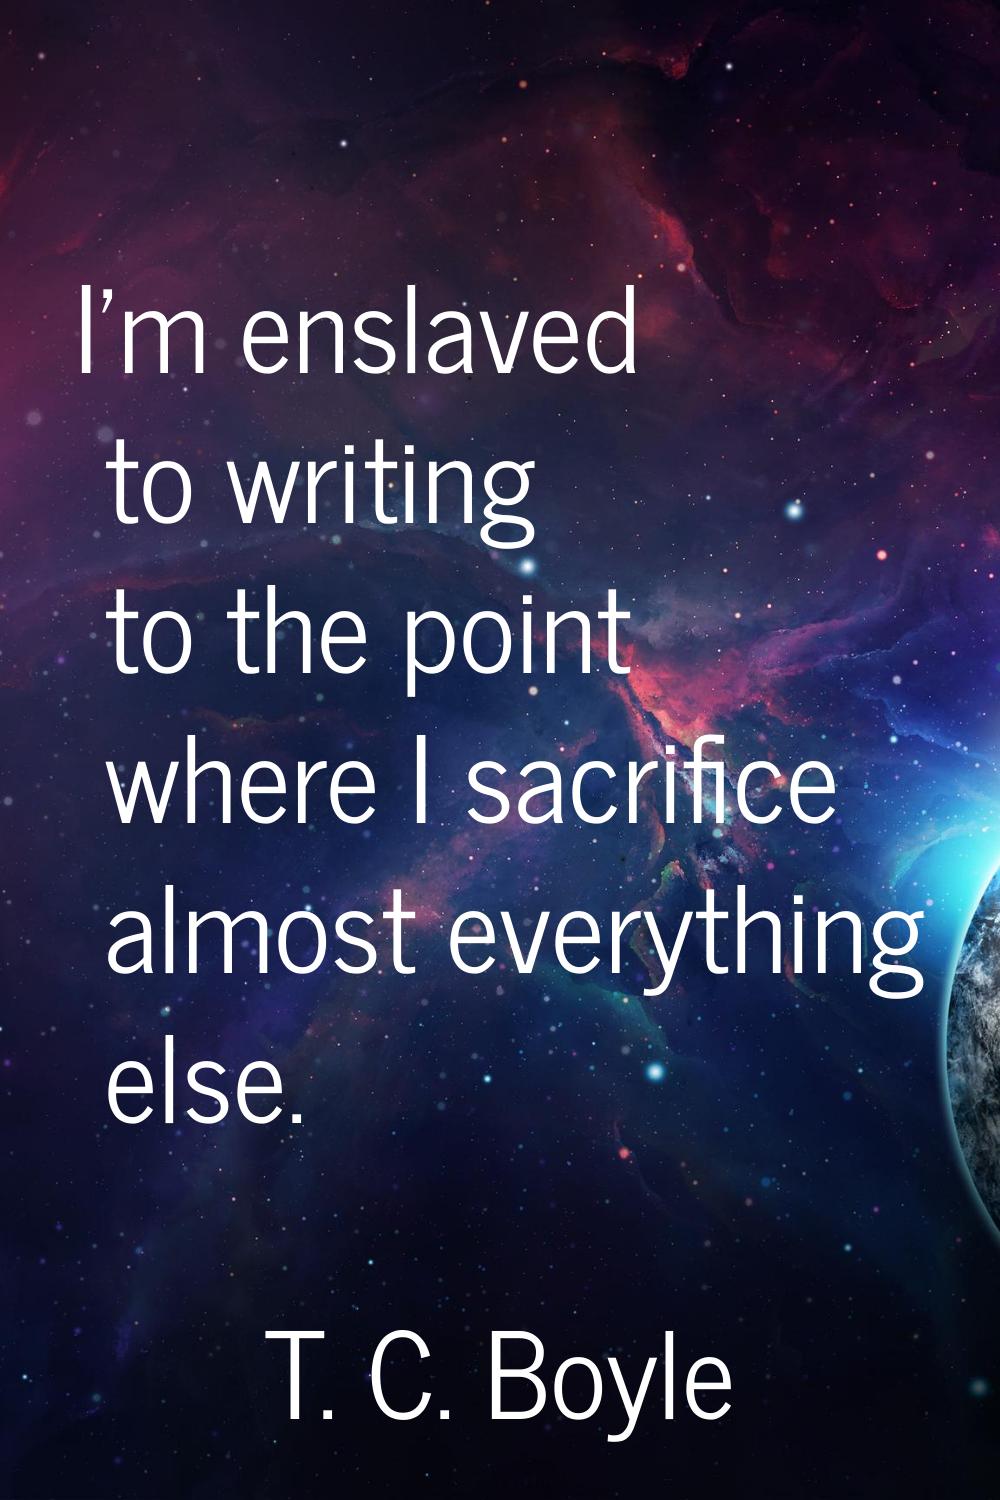 I'm enslaved to writing to the point where I sacrifice almost everything else.